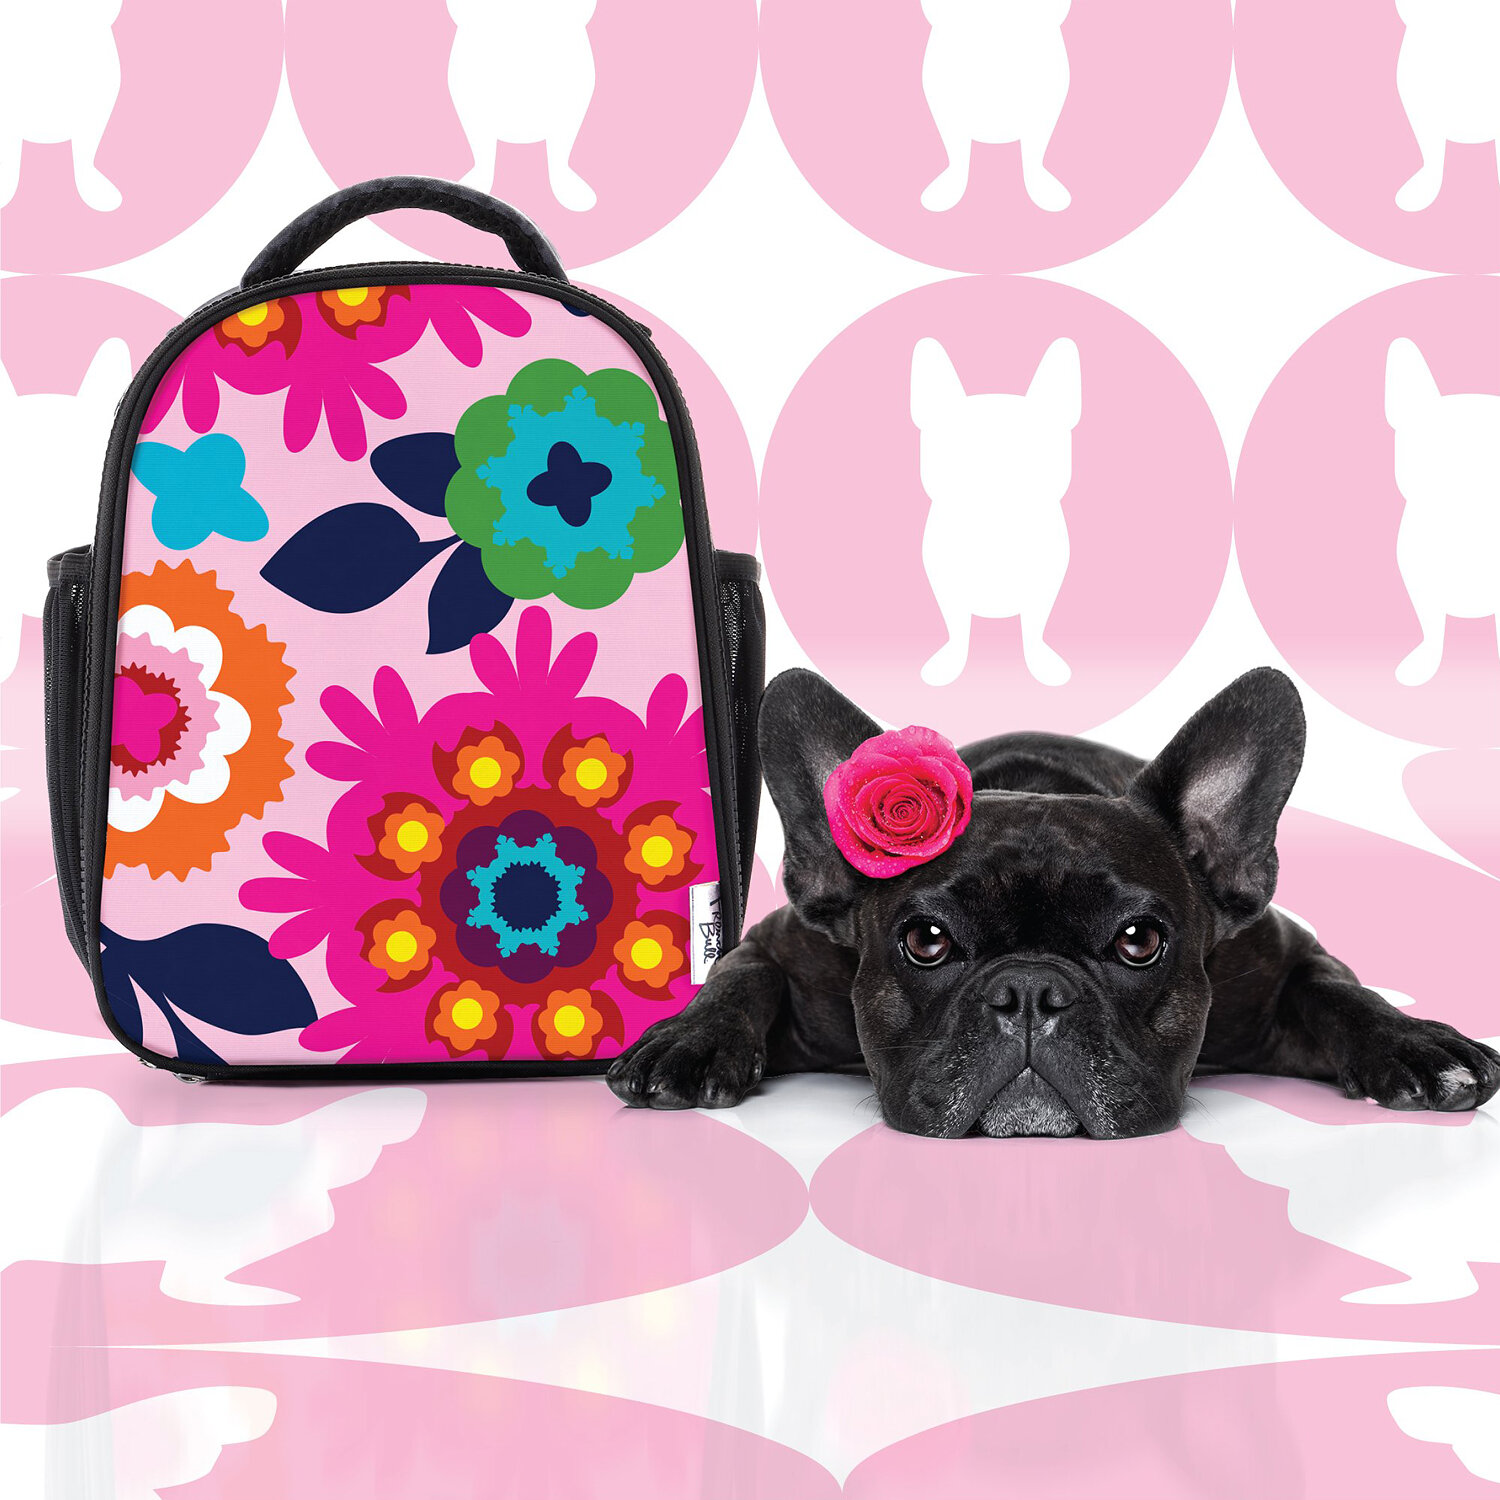  Composite image of French Bull‘s lunch bag, pattern background and stock image using Photoshop and Illustrator 